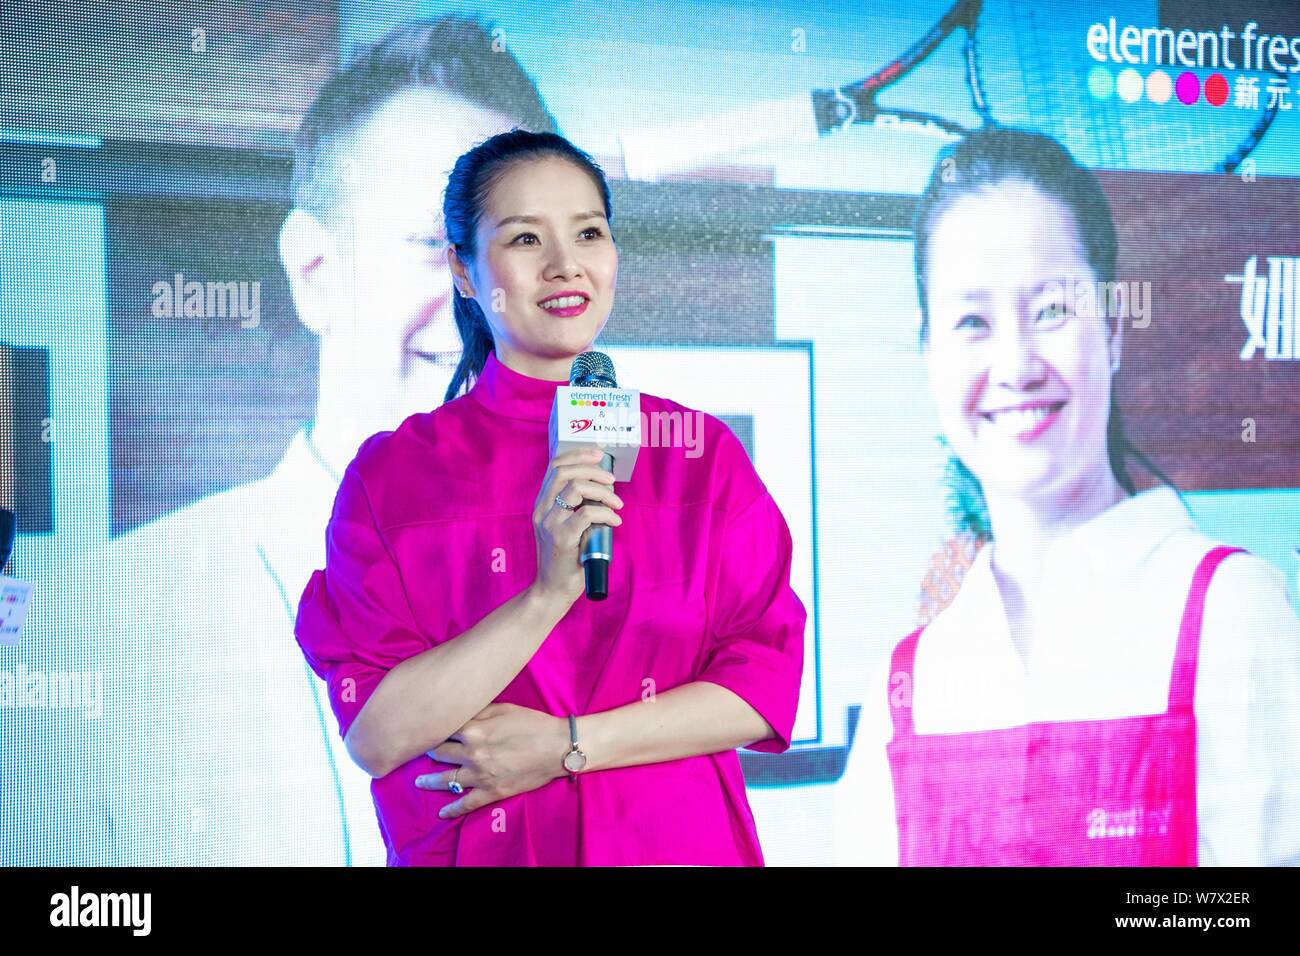 Retired Chinese tennis star Li Na attends the opening ceremony of the restaurant co-opened by her and restaurant brand 'Element Fresh' in Wuhan city, Stock Photo